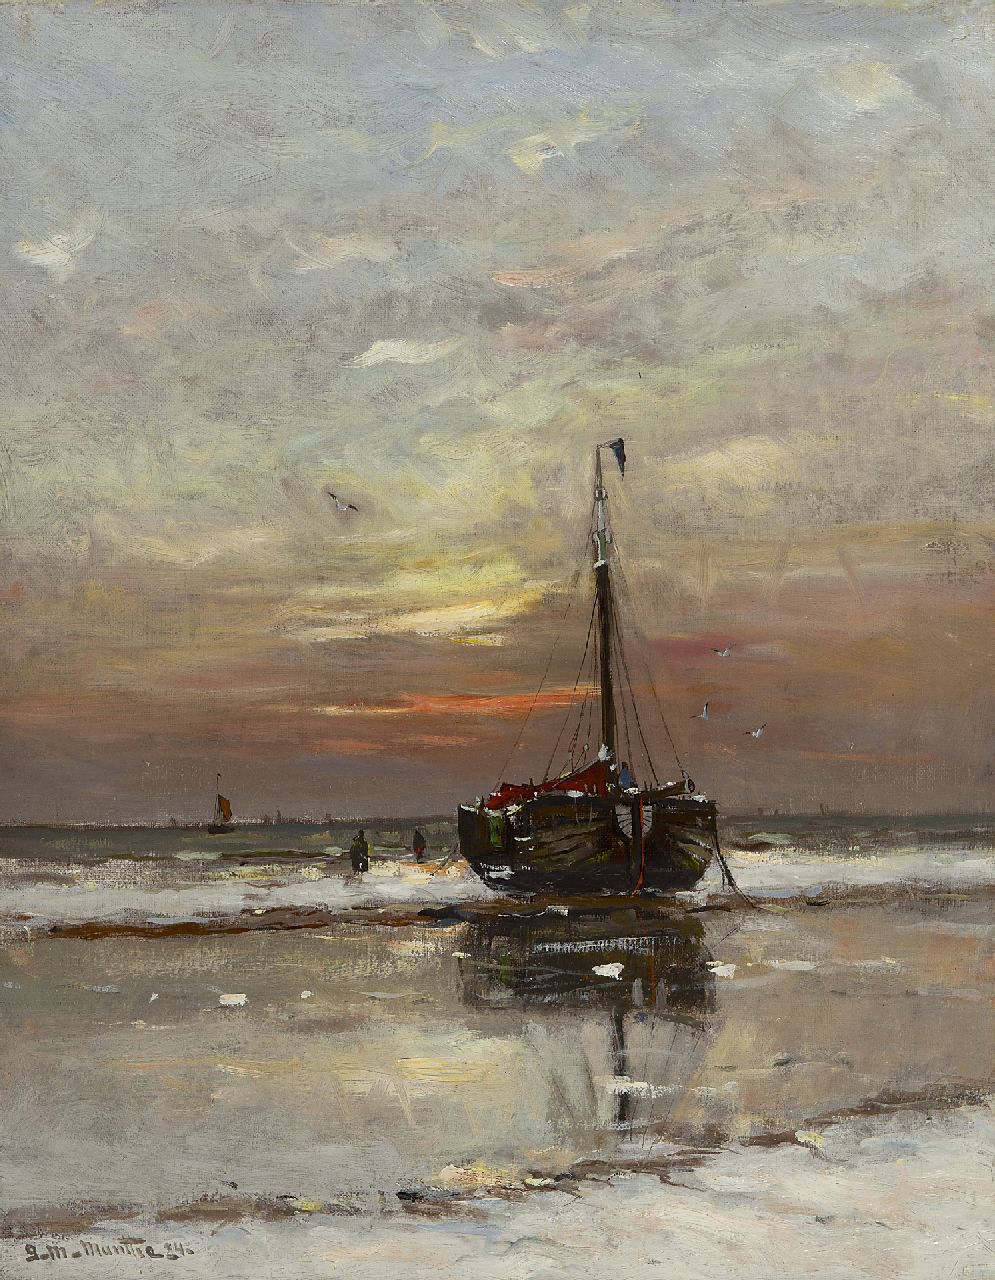 Munthe G.A.L.  | Gerhard Arij Ludwig 'Morgenstjerne' Munthe, A bomschuit on the beach at sunset, oil on canvas 50.8 x 40.7 cm, signed l.l. and dated '24